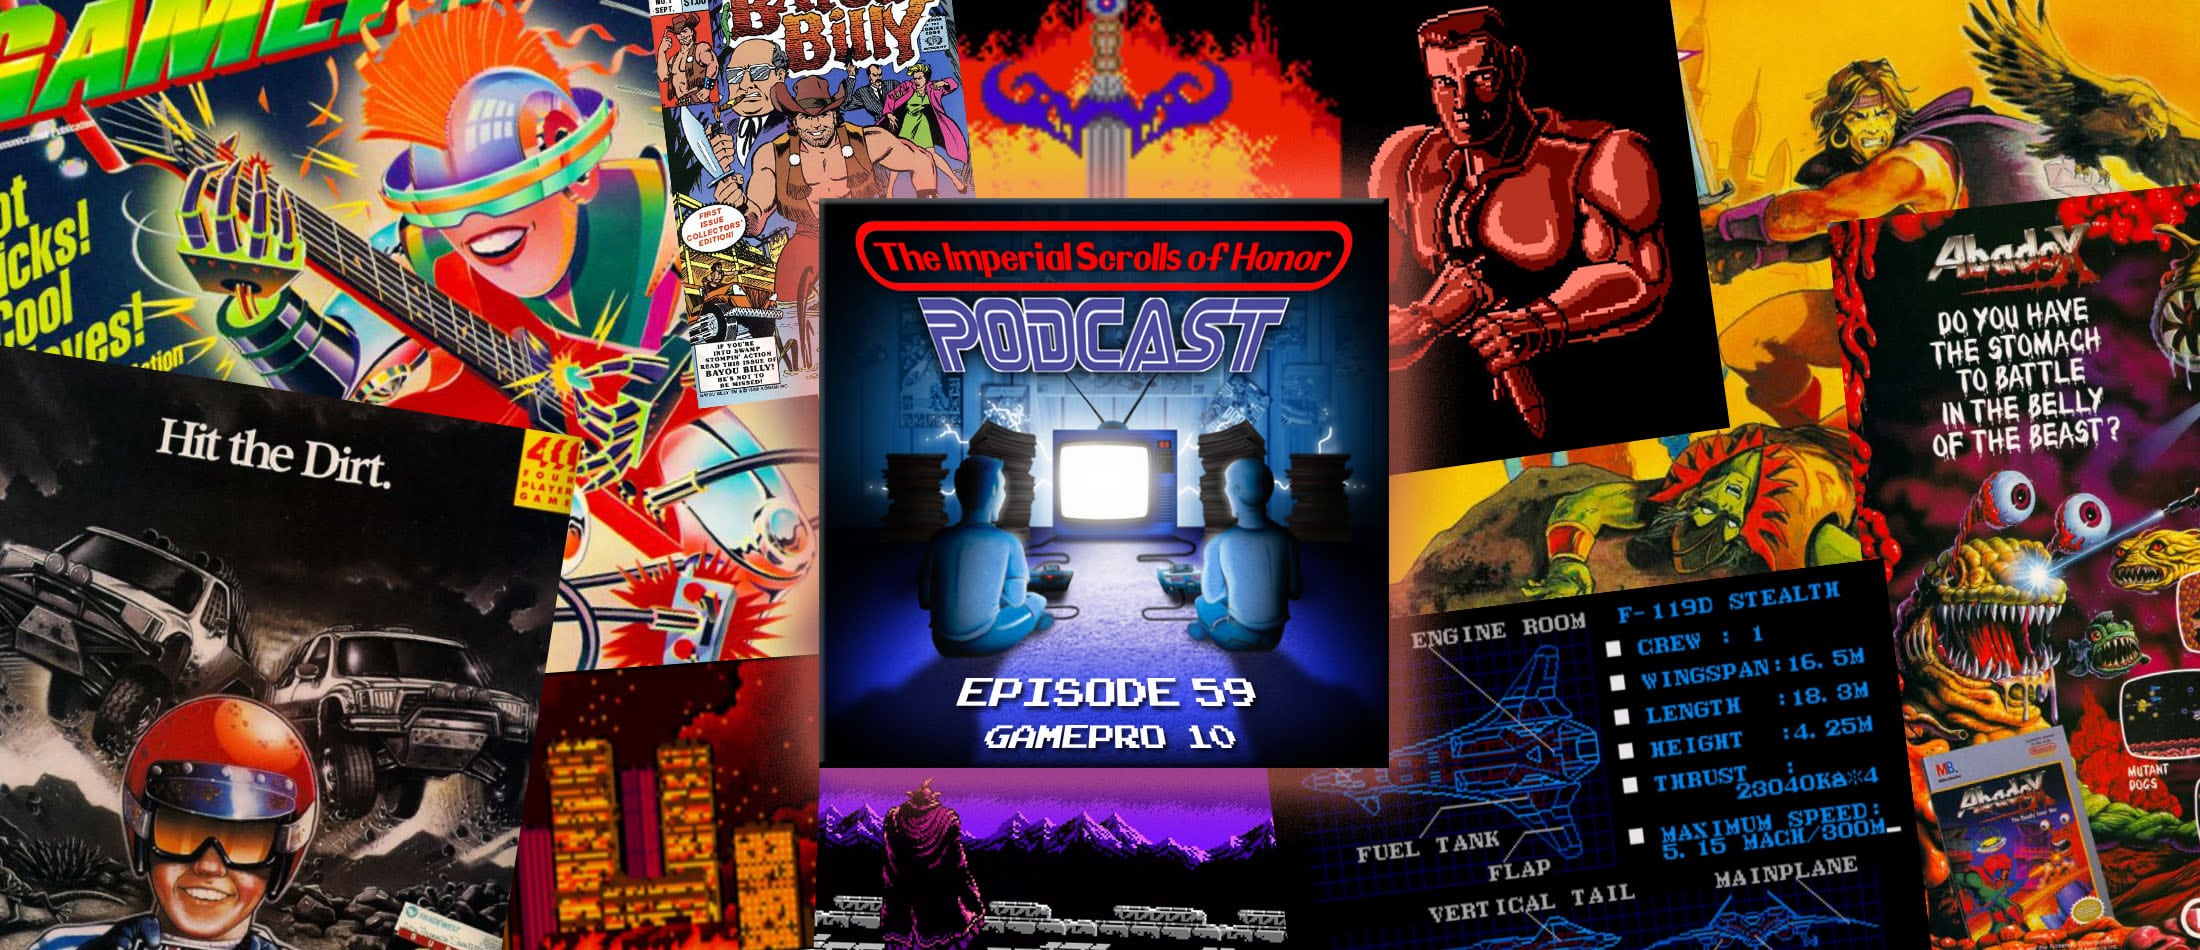 The Imperial Scrolls of Honor Podcast - Ep 59 - GamePro #10